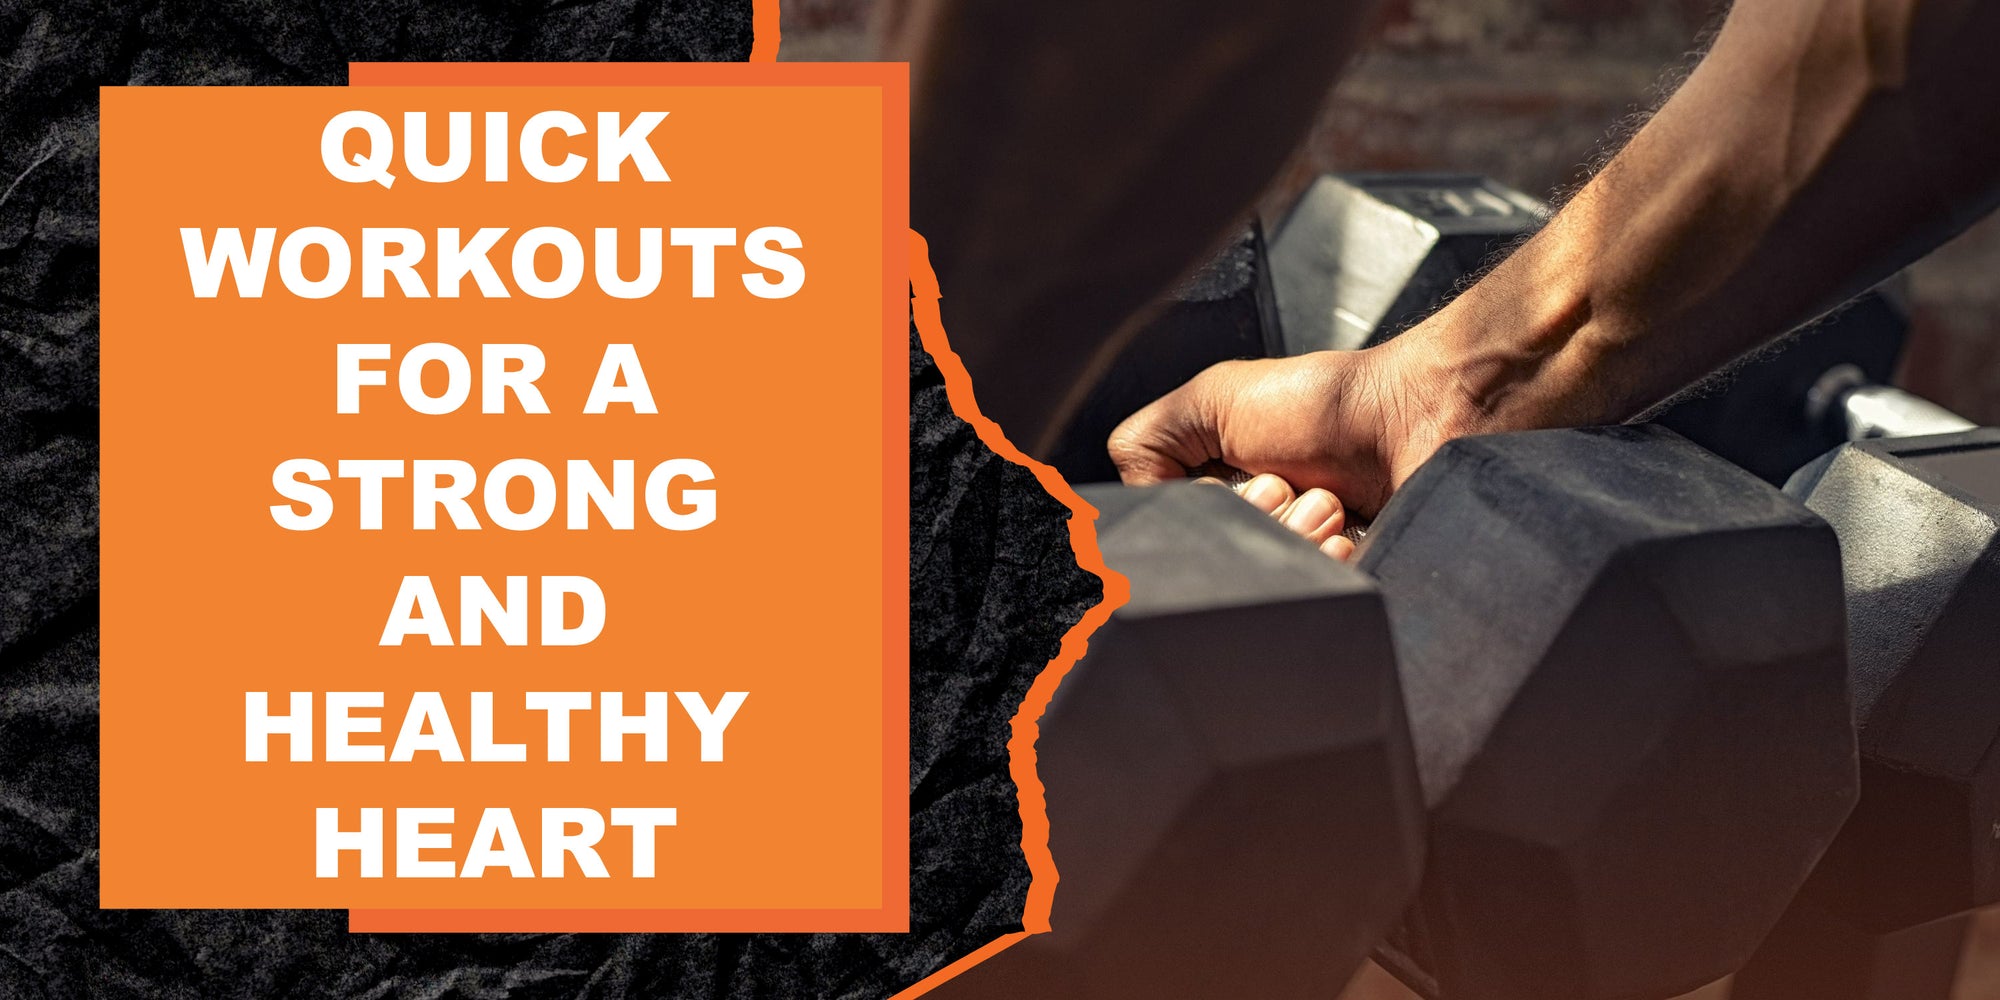 Quick Workouts for a Strong and Healthy Heart